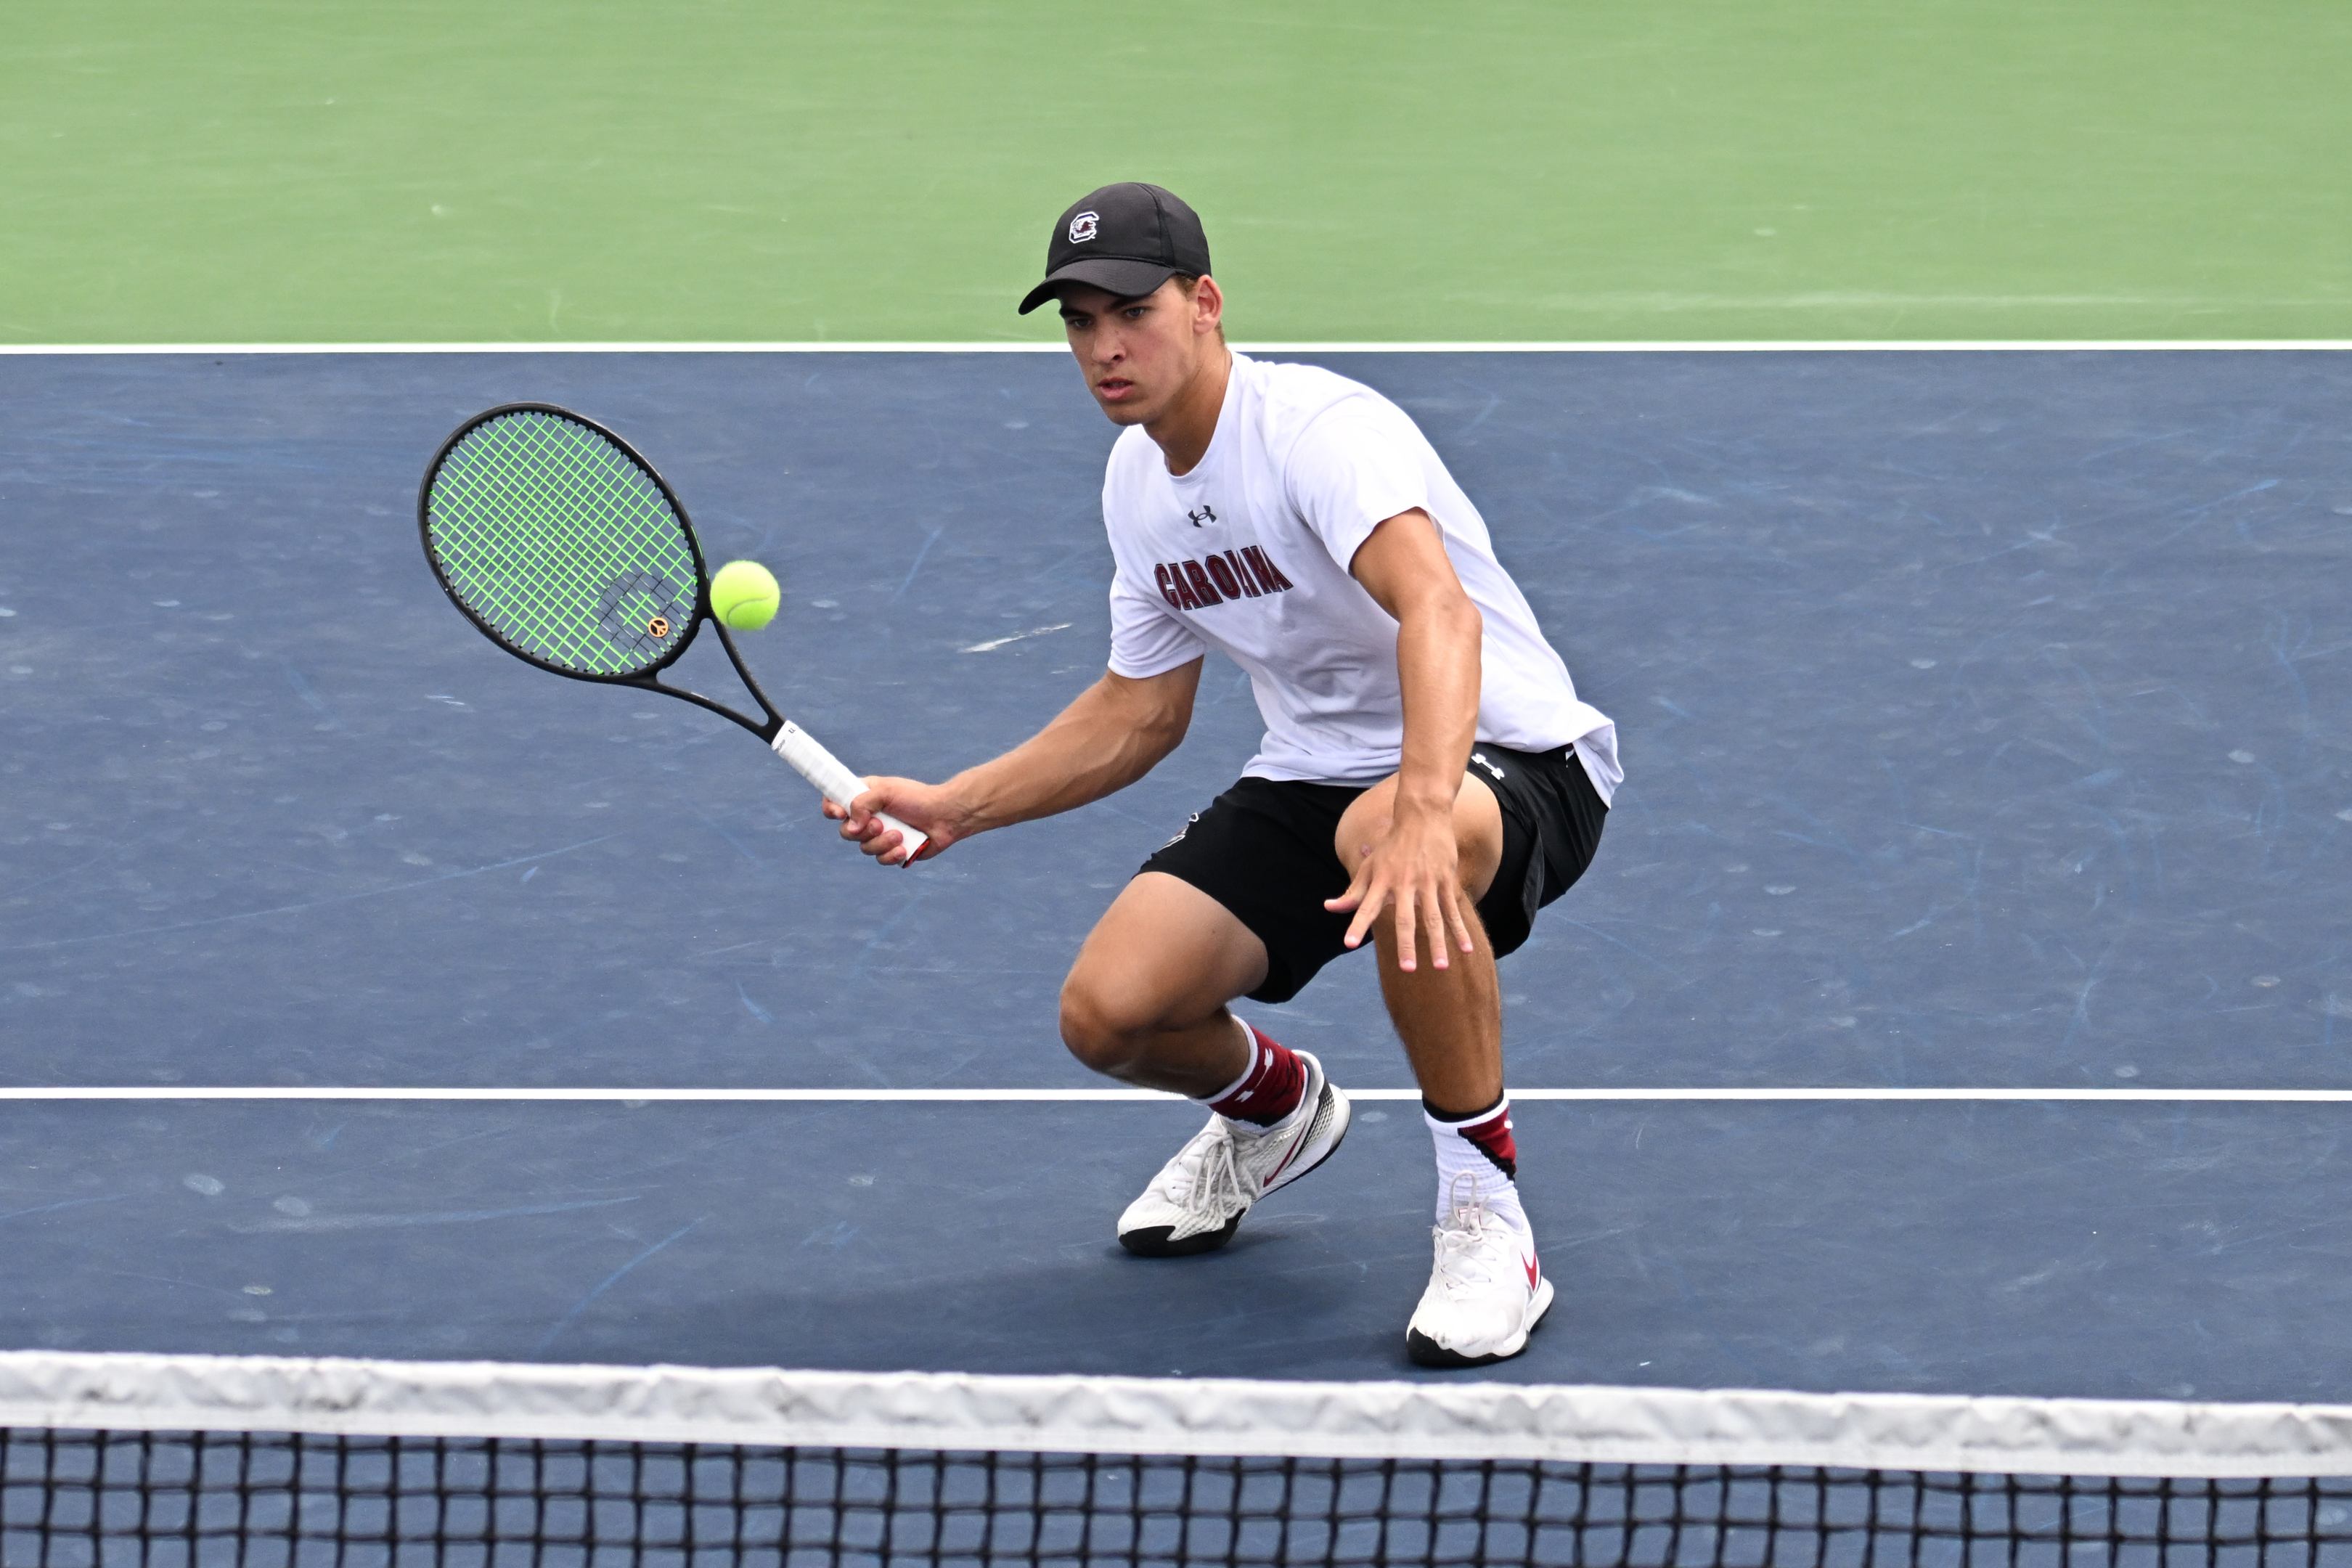 Six Gamecocks Earn Wins on First Day of Regional Championships